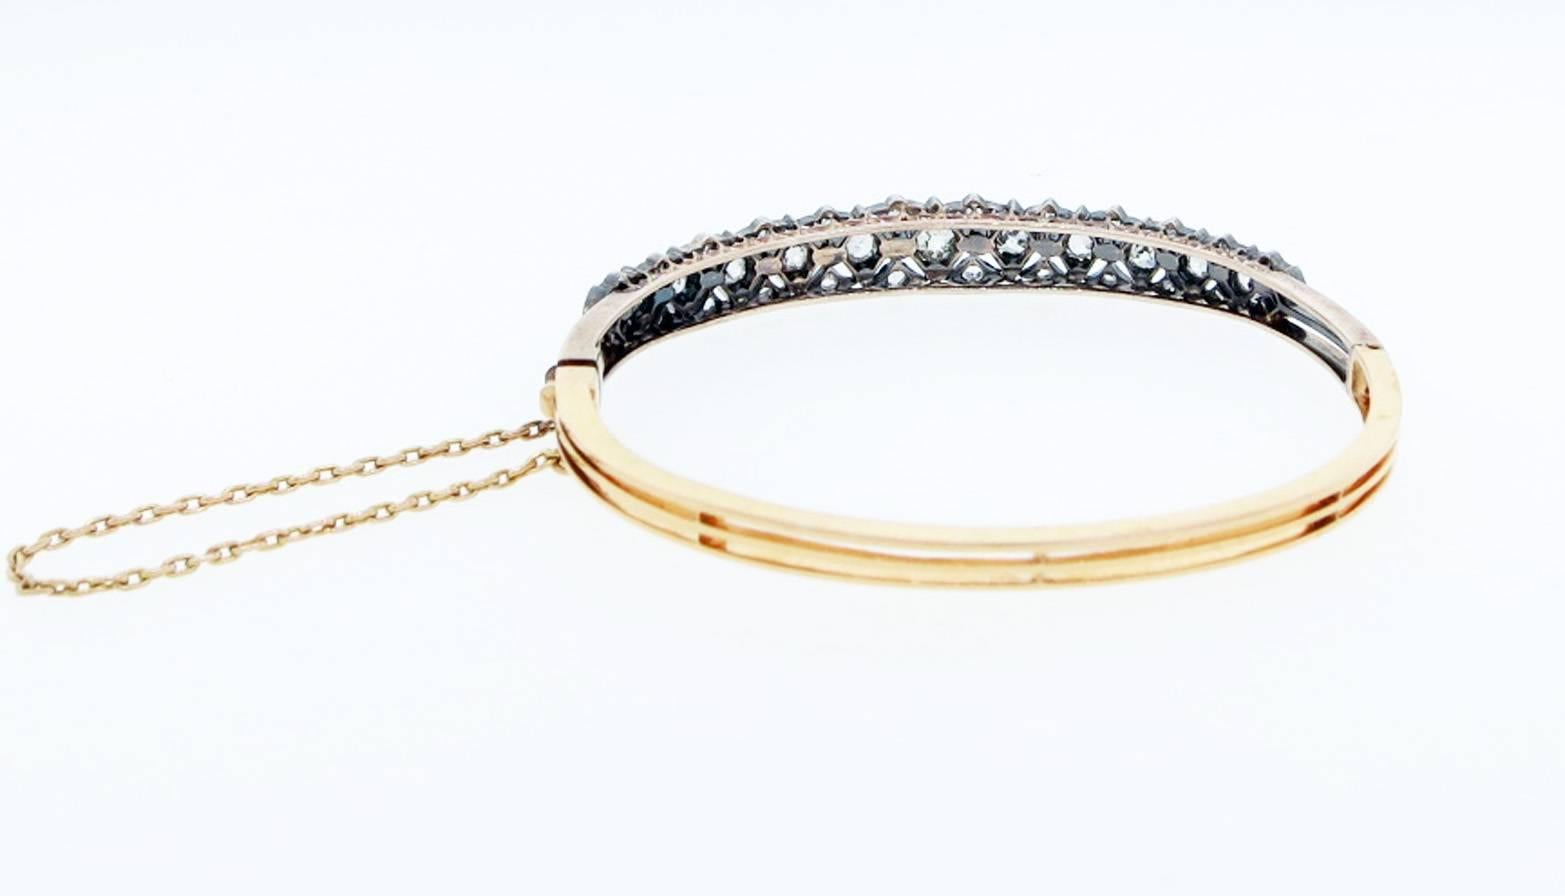 Exquisite antique 18kt. yellow gold silver top bangle bracelet with a very special sparkle that only a genuine antique exhibits. Prong set with graduating old cushion cut diamonds in the center with 54 old rose cut diamonds accents.The bracelet is